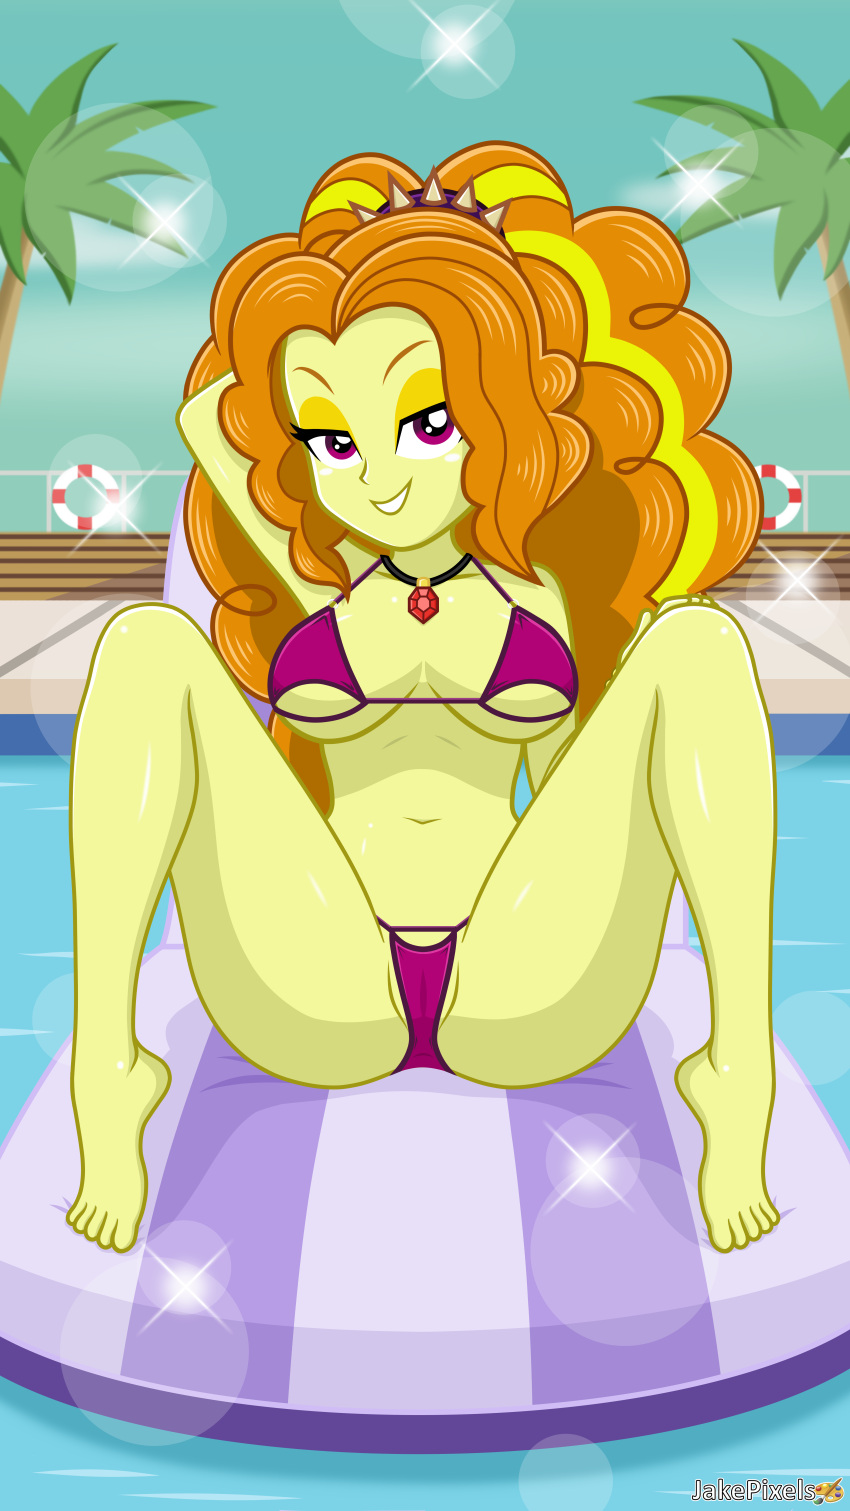 adagio_dazzle equestria_girls jakepixels my_little_pony older older_female young_adult young_adult_female young_adult_woman